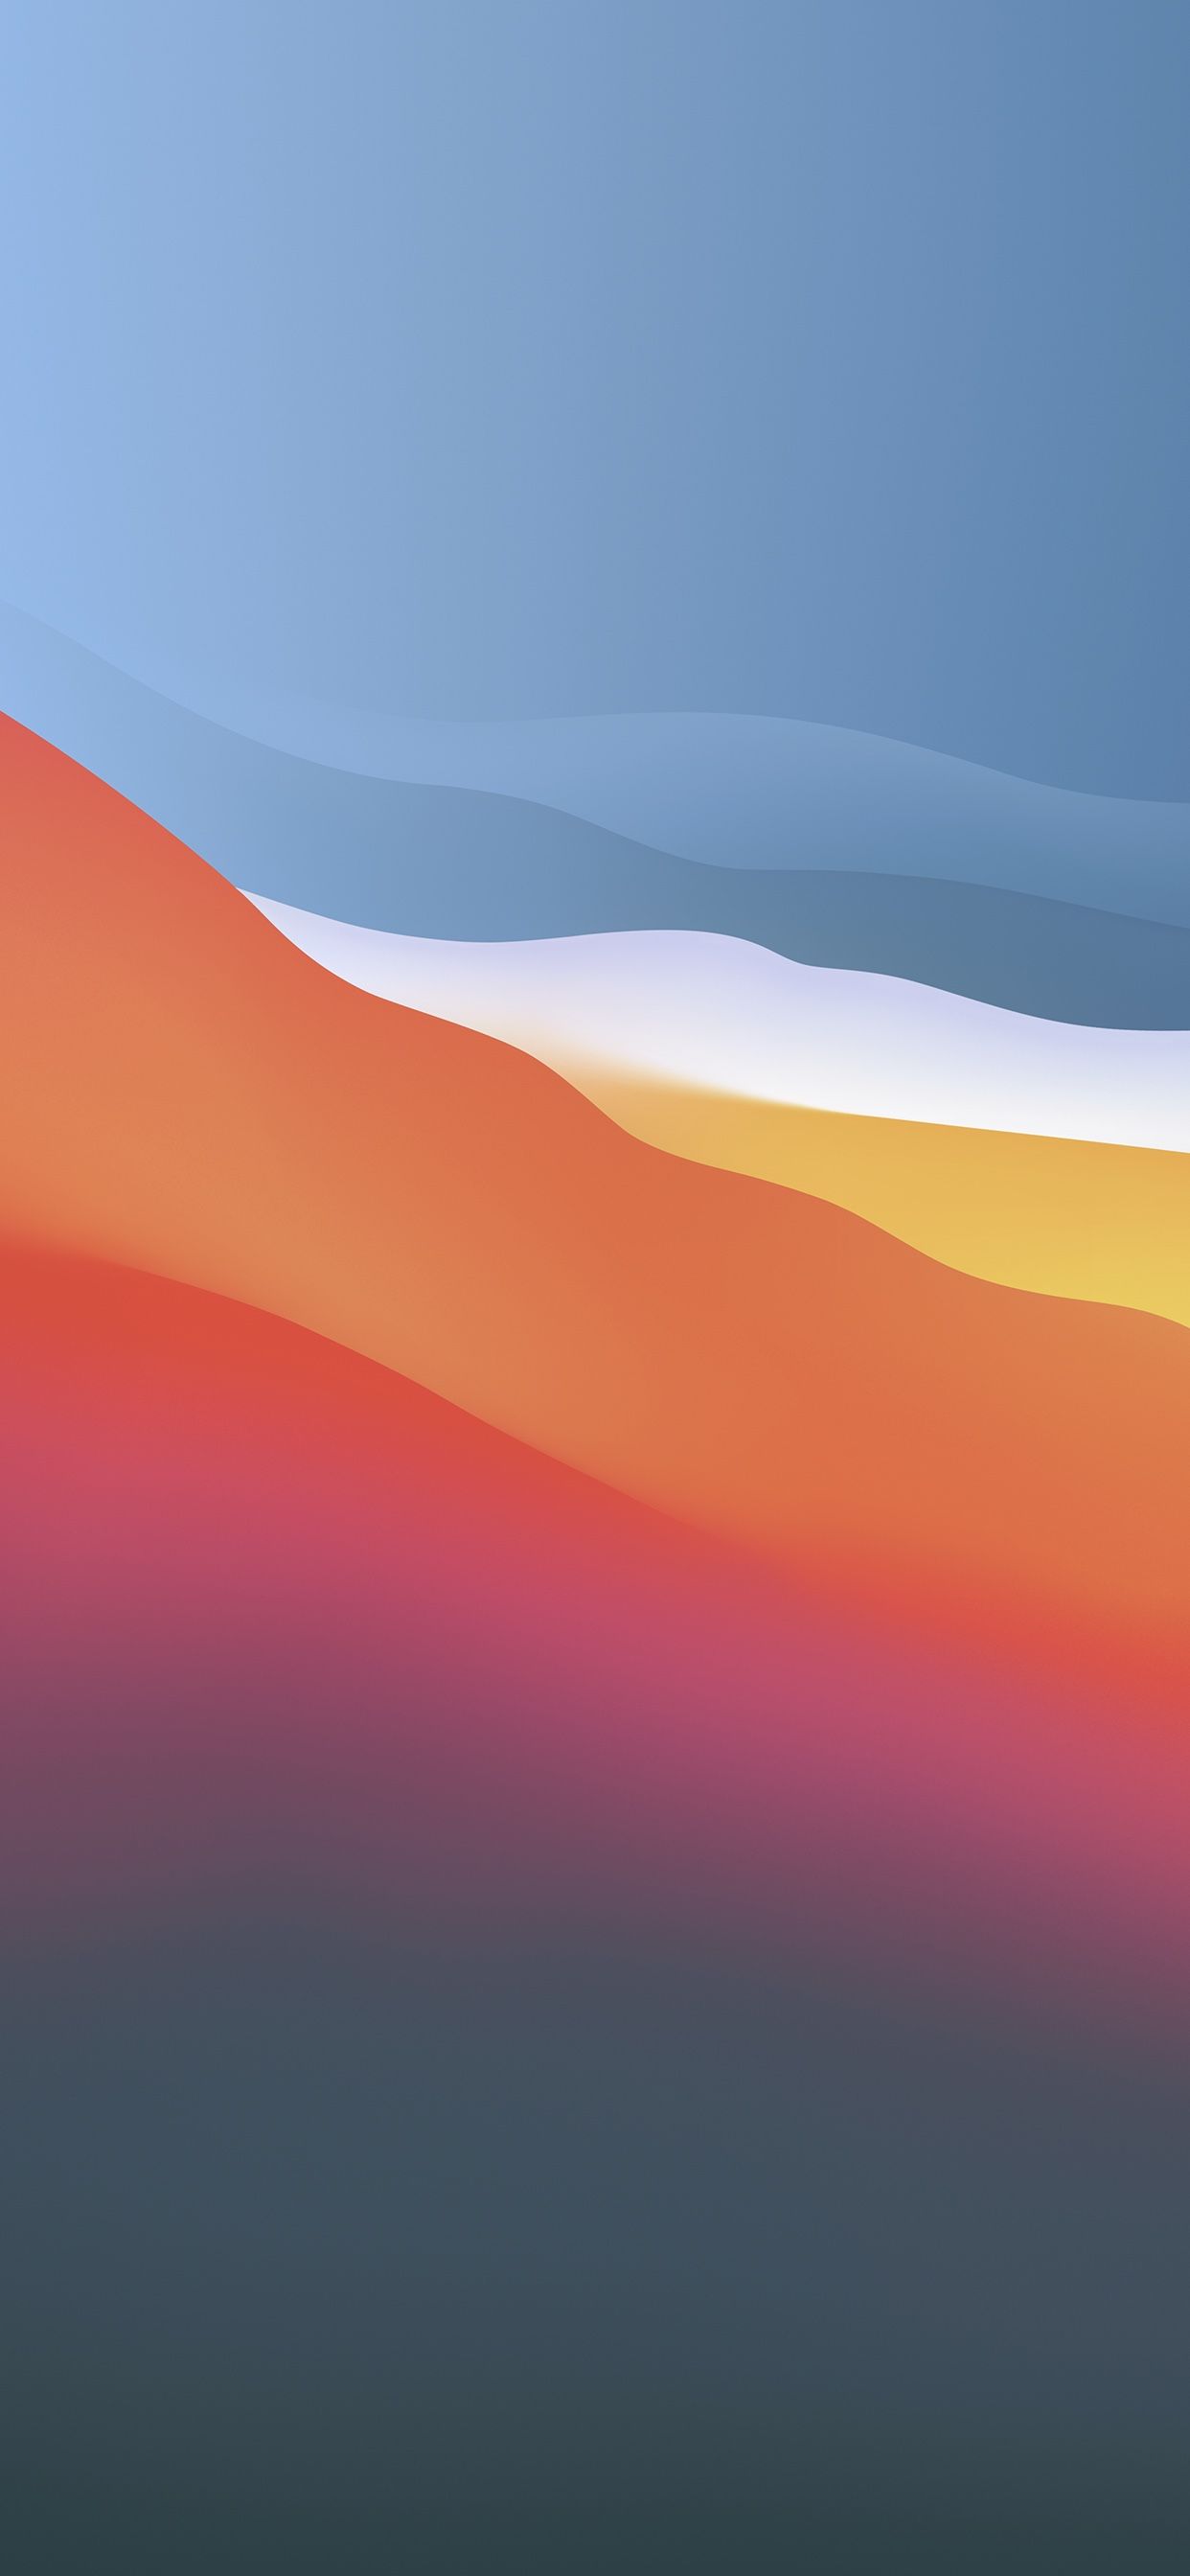 Download these modified iOS 14 and Big Sur wallpaper